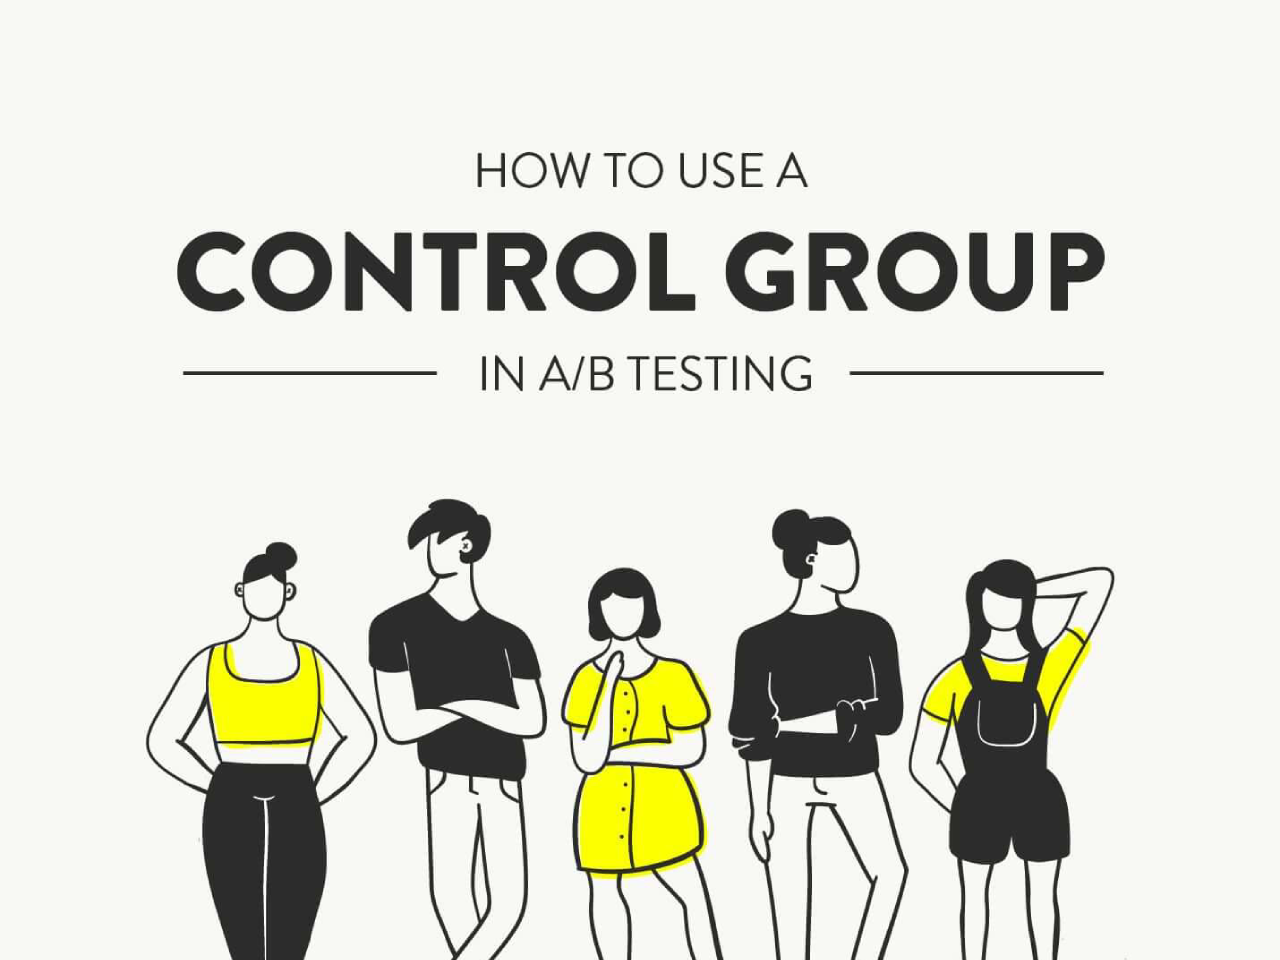 How To Use A Control Group In A/B Testing [InfoGraphic]